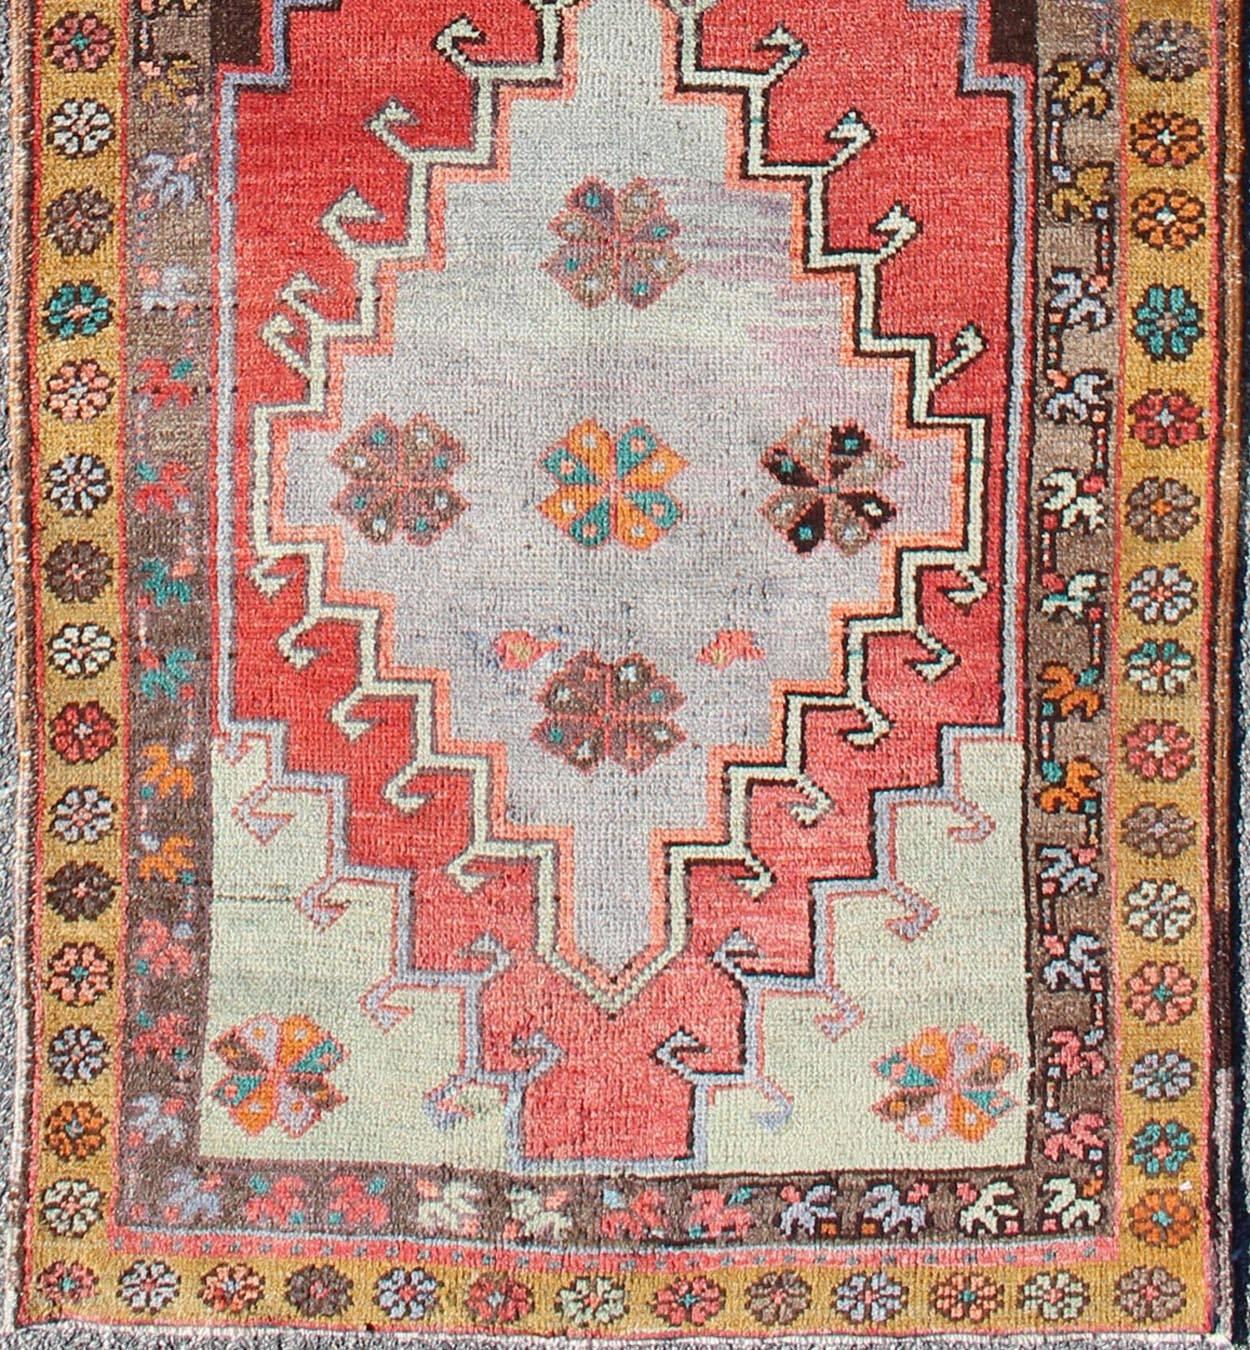 This vintage Oushak runner features a unique blend of cheerful colors and an intricately beautiful design. The Sub-geometric tribal medallions are complemented by other Sub-geometric elements in the surrounding cornices and border. The various